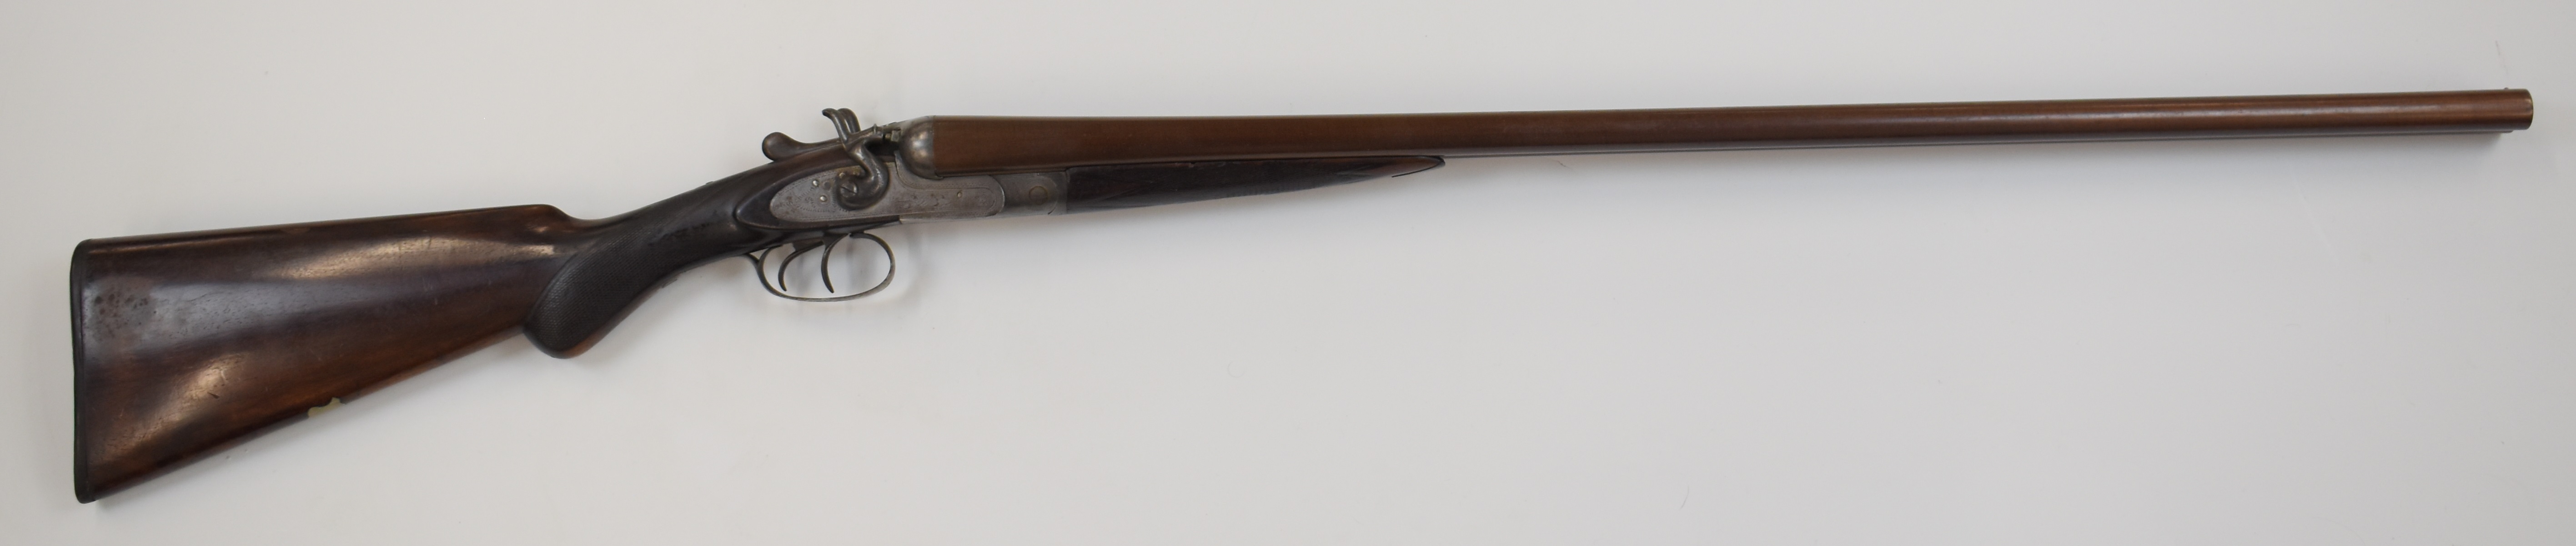 Skimin & Wood 12 bore side by side hammer action shotgun with engraved scenes of birds to the locks, - Image 10 of 12